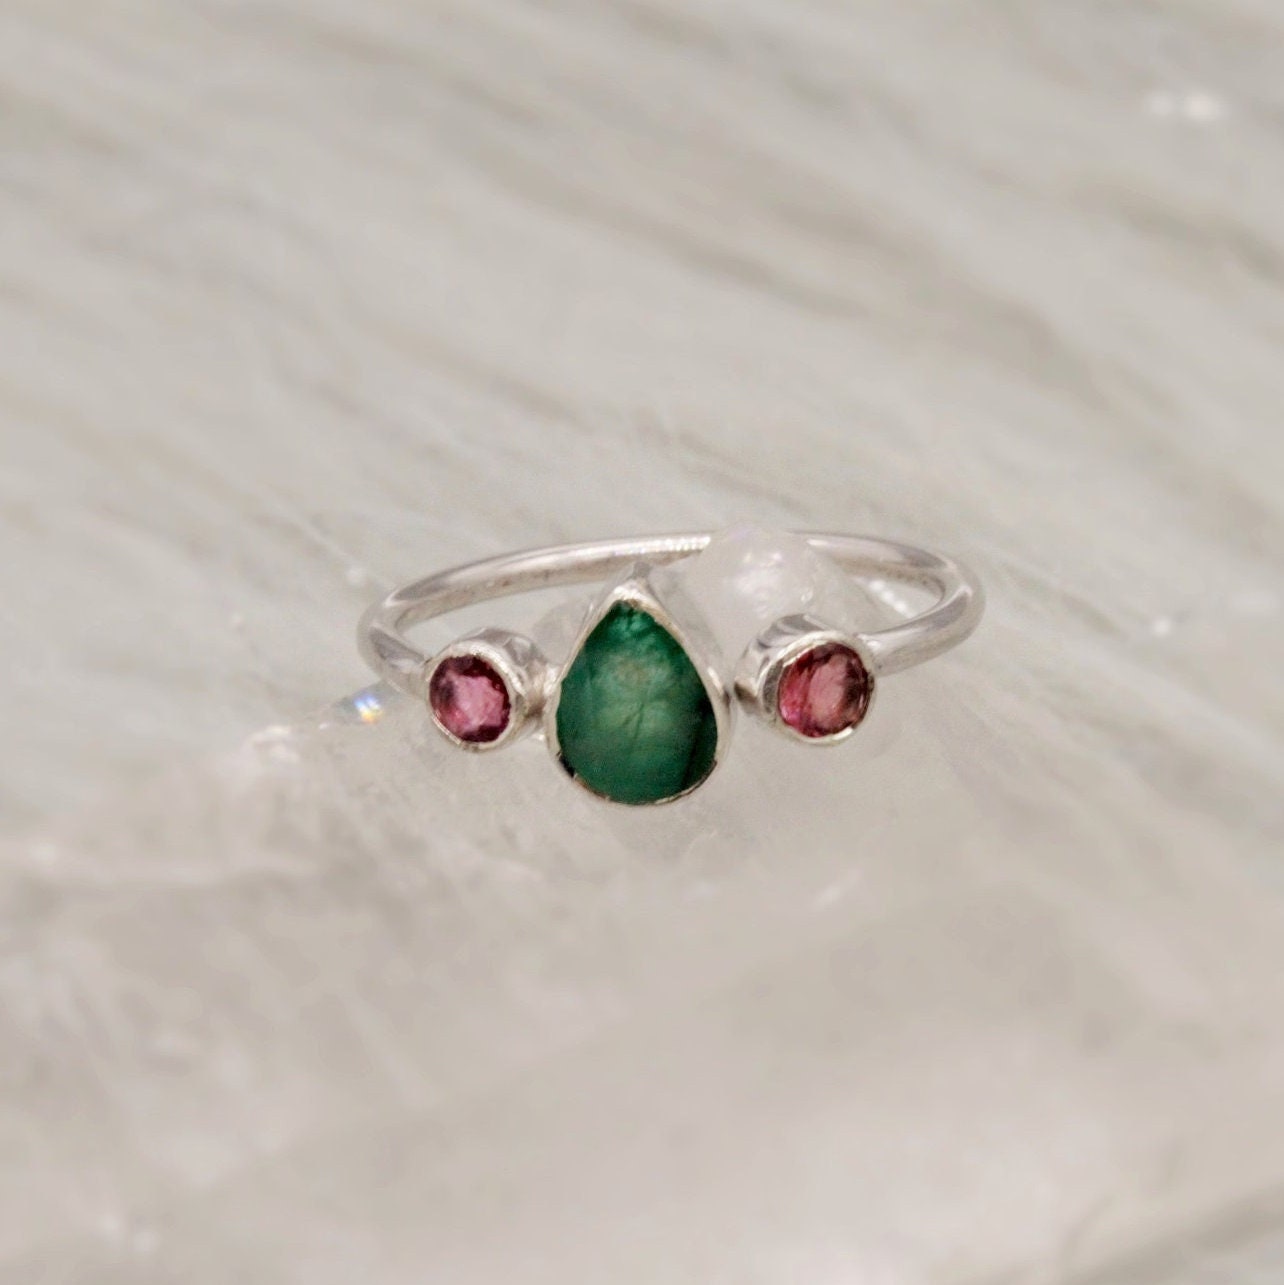 Pink Tourmaline, Emerald Silver Ring, Sterling Silver Emerald Jewelry, May, October Birthstone Ring, Stackable Rings For Women